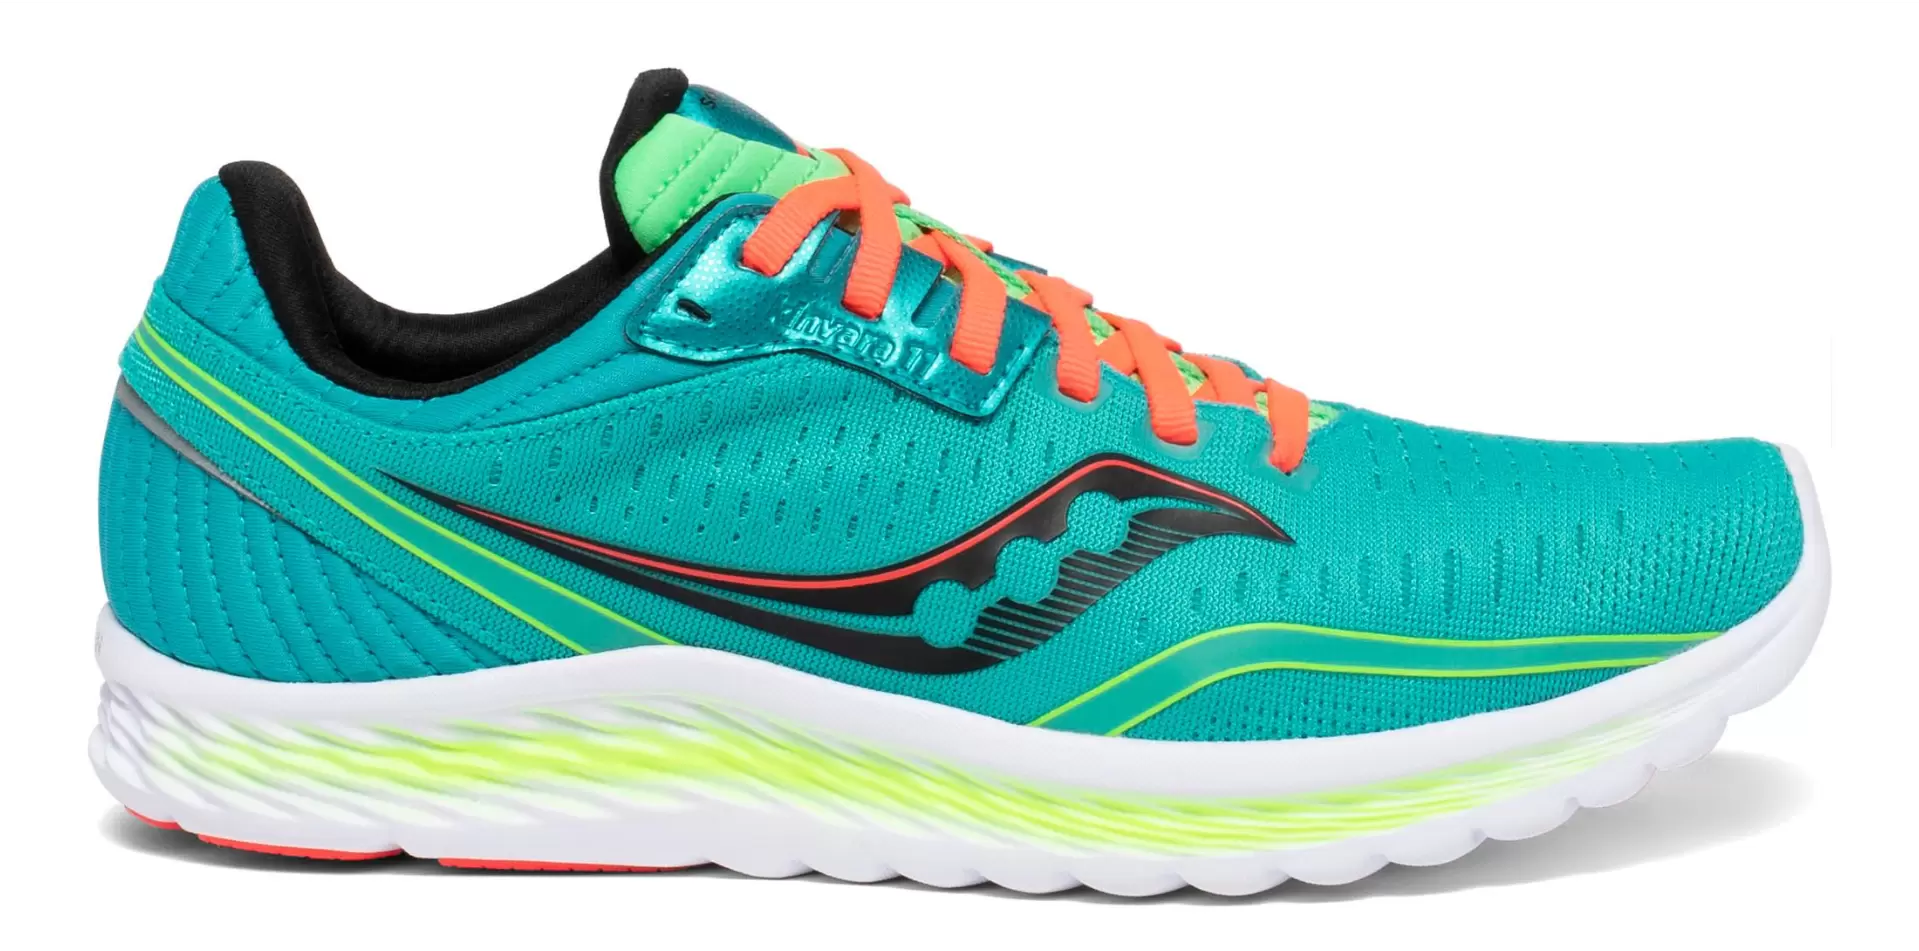 The Best Lightweight Running Shoes: Yes, These Are The Shoes You’ve ...